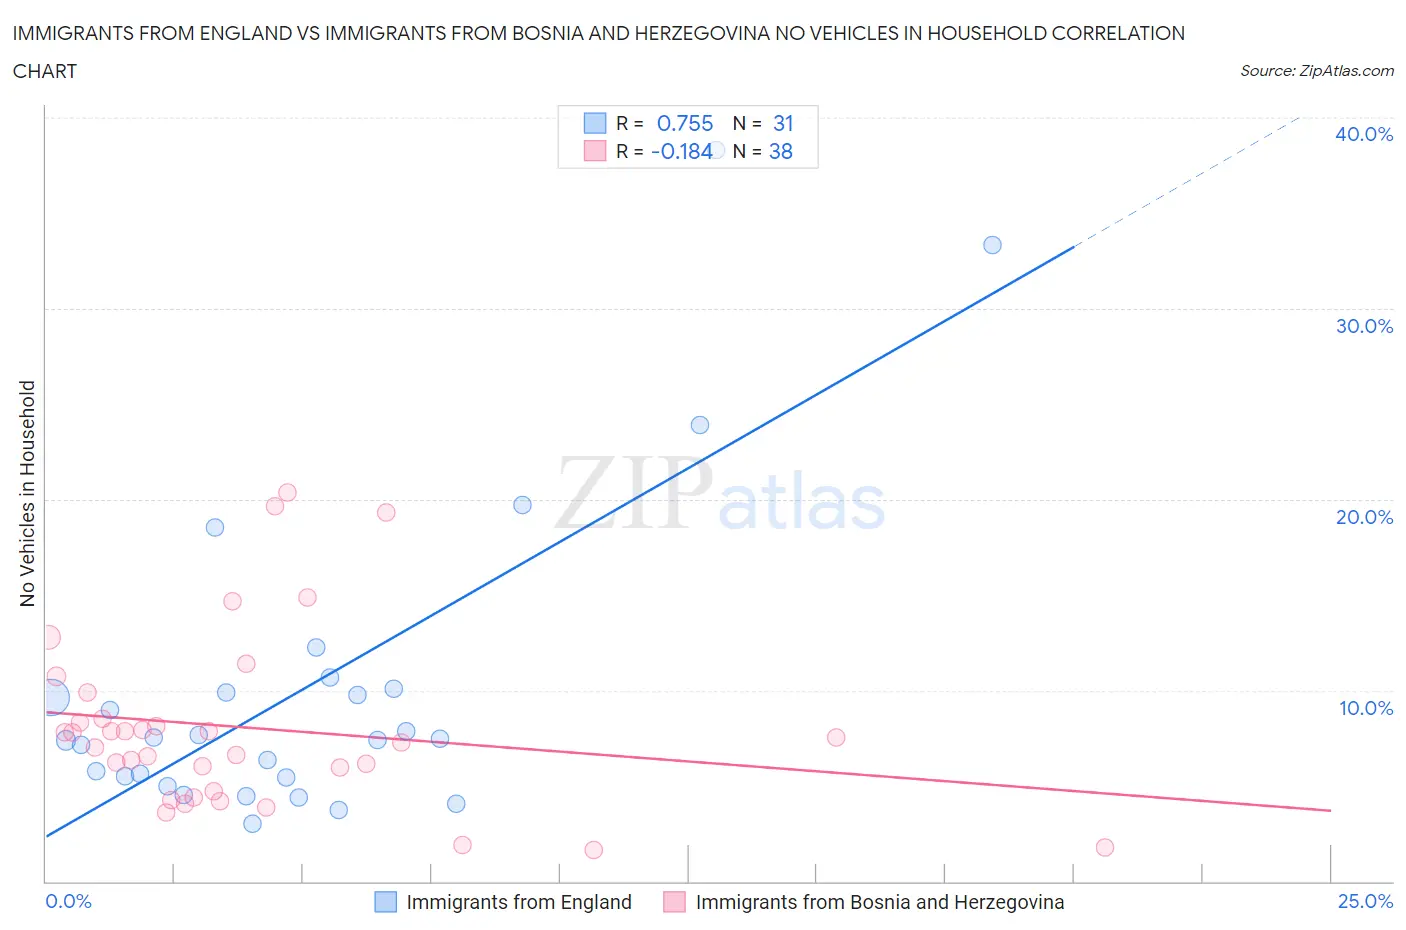 Immigrants from England vs Immigrants from Bosnia and Herzegovina No Vehicles in Household